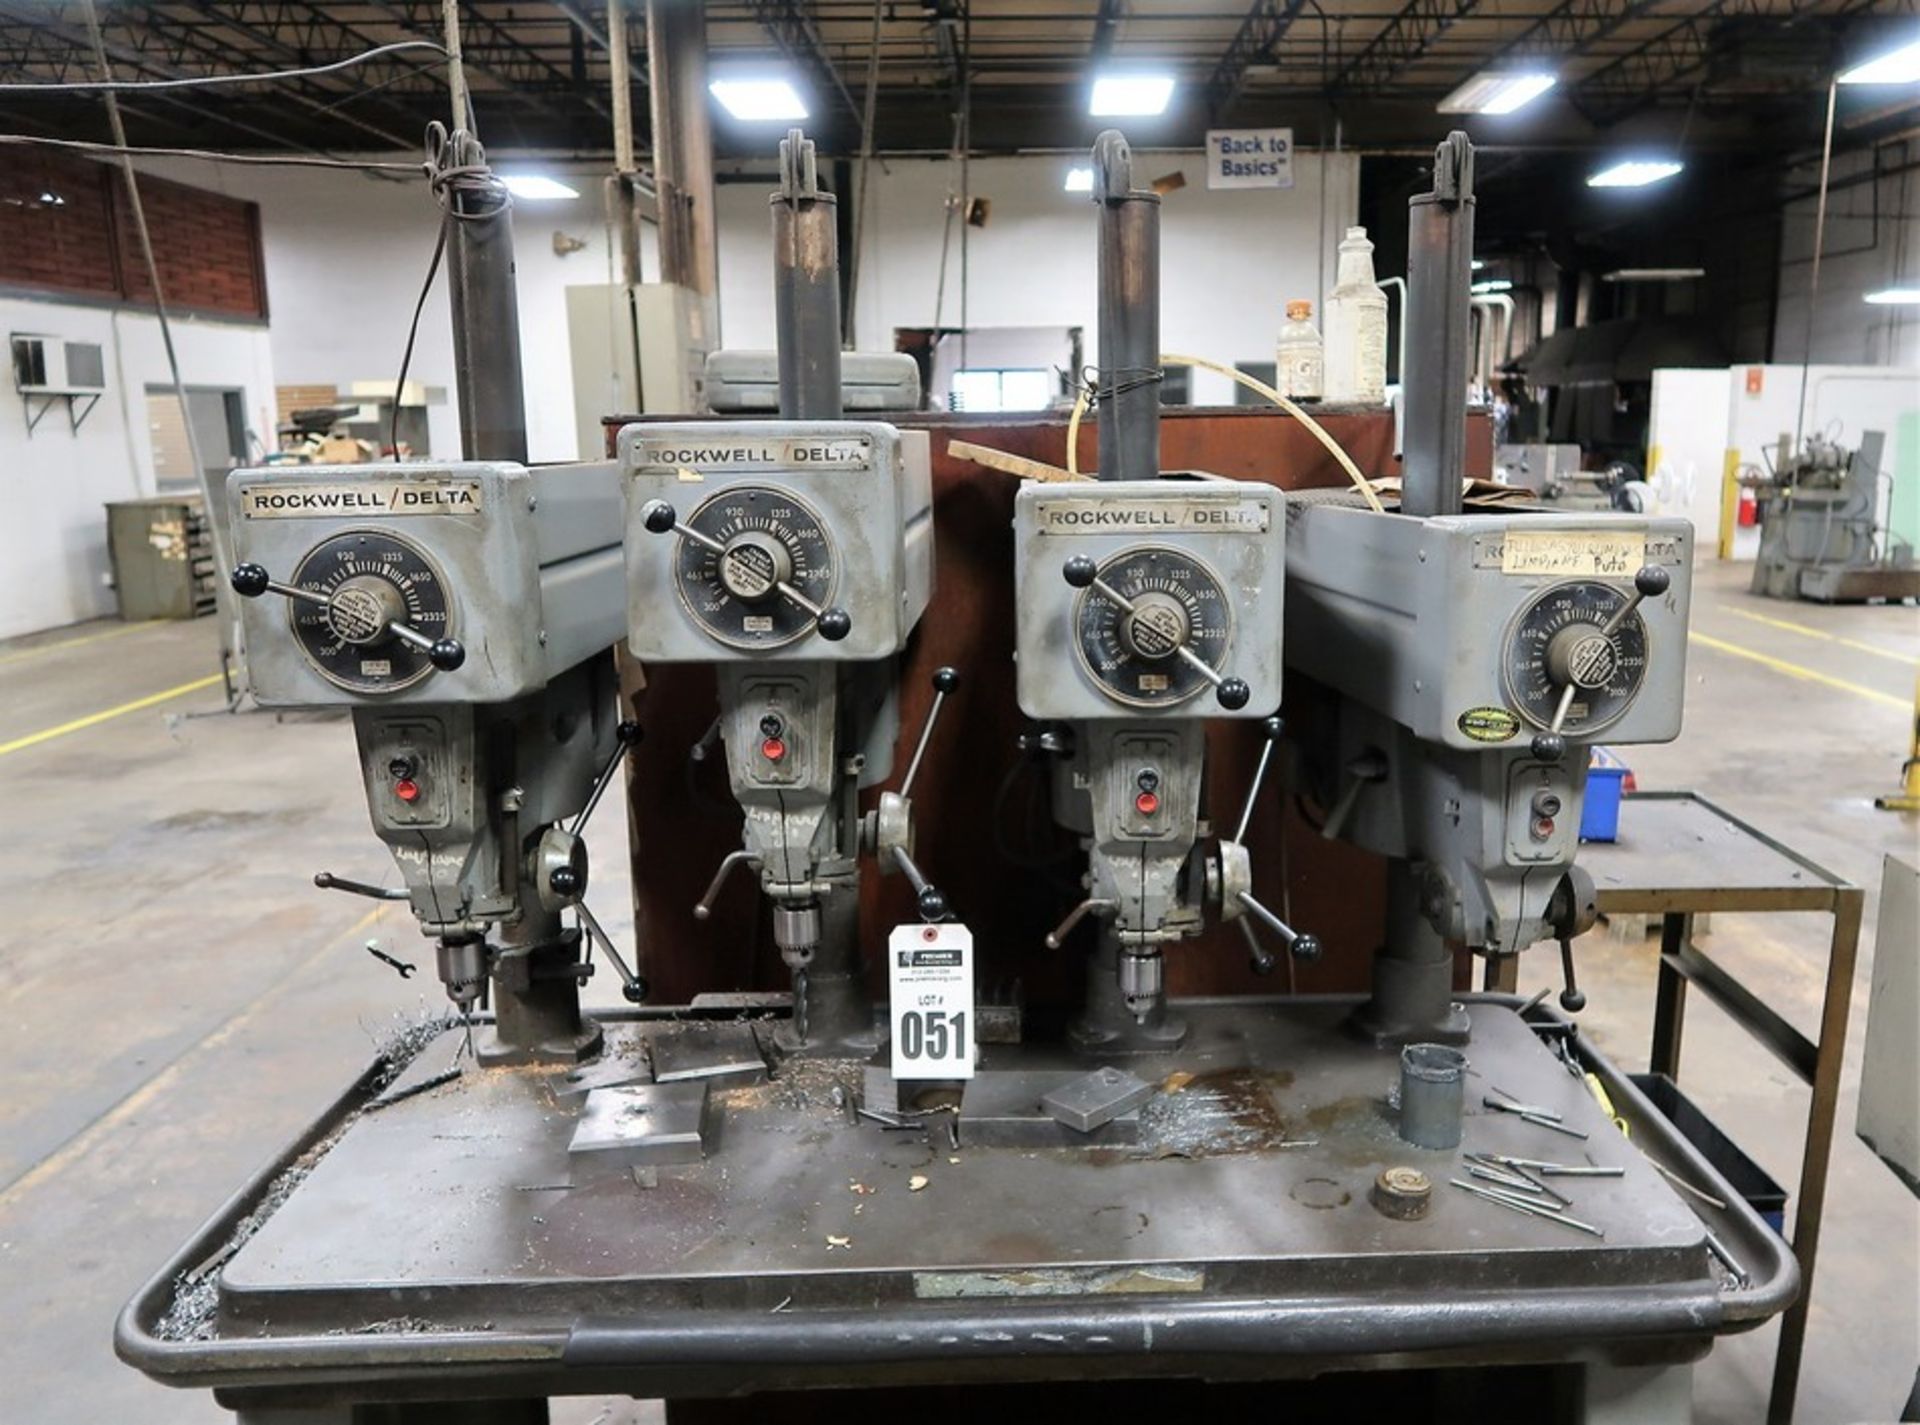 Rockwell Delta 4 Spindle Drill Press Model 15-655